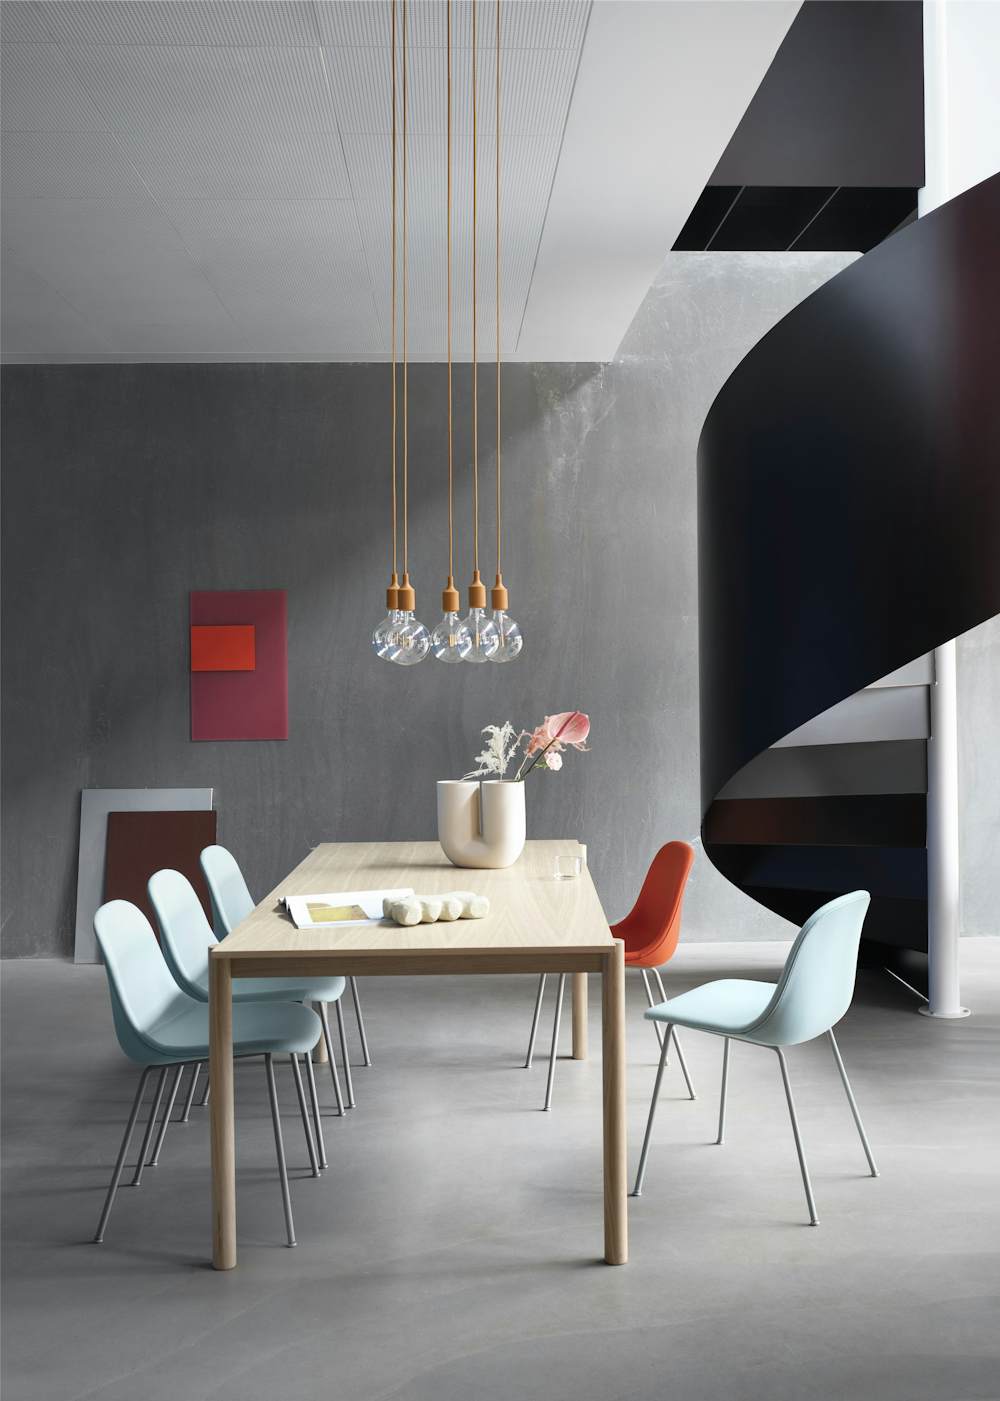 Linear Table and E27 Pendant Lights in a dining room setting